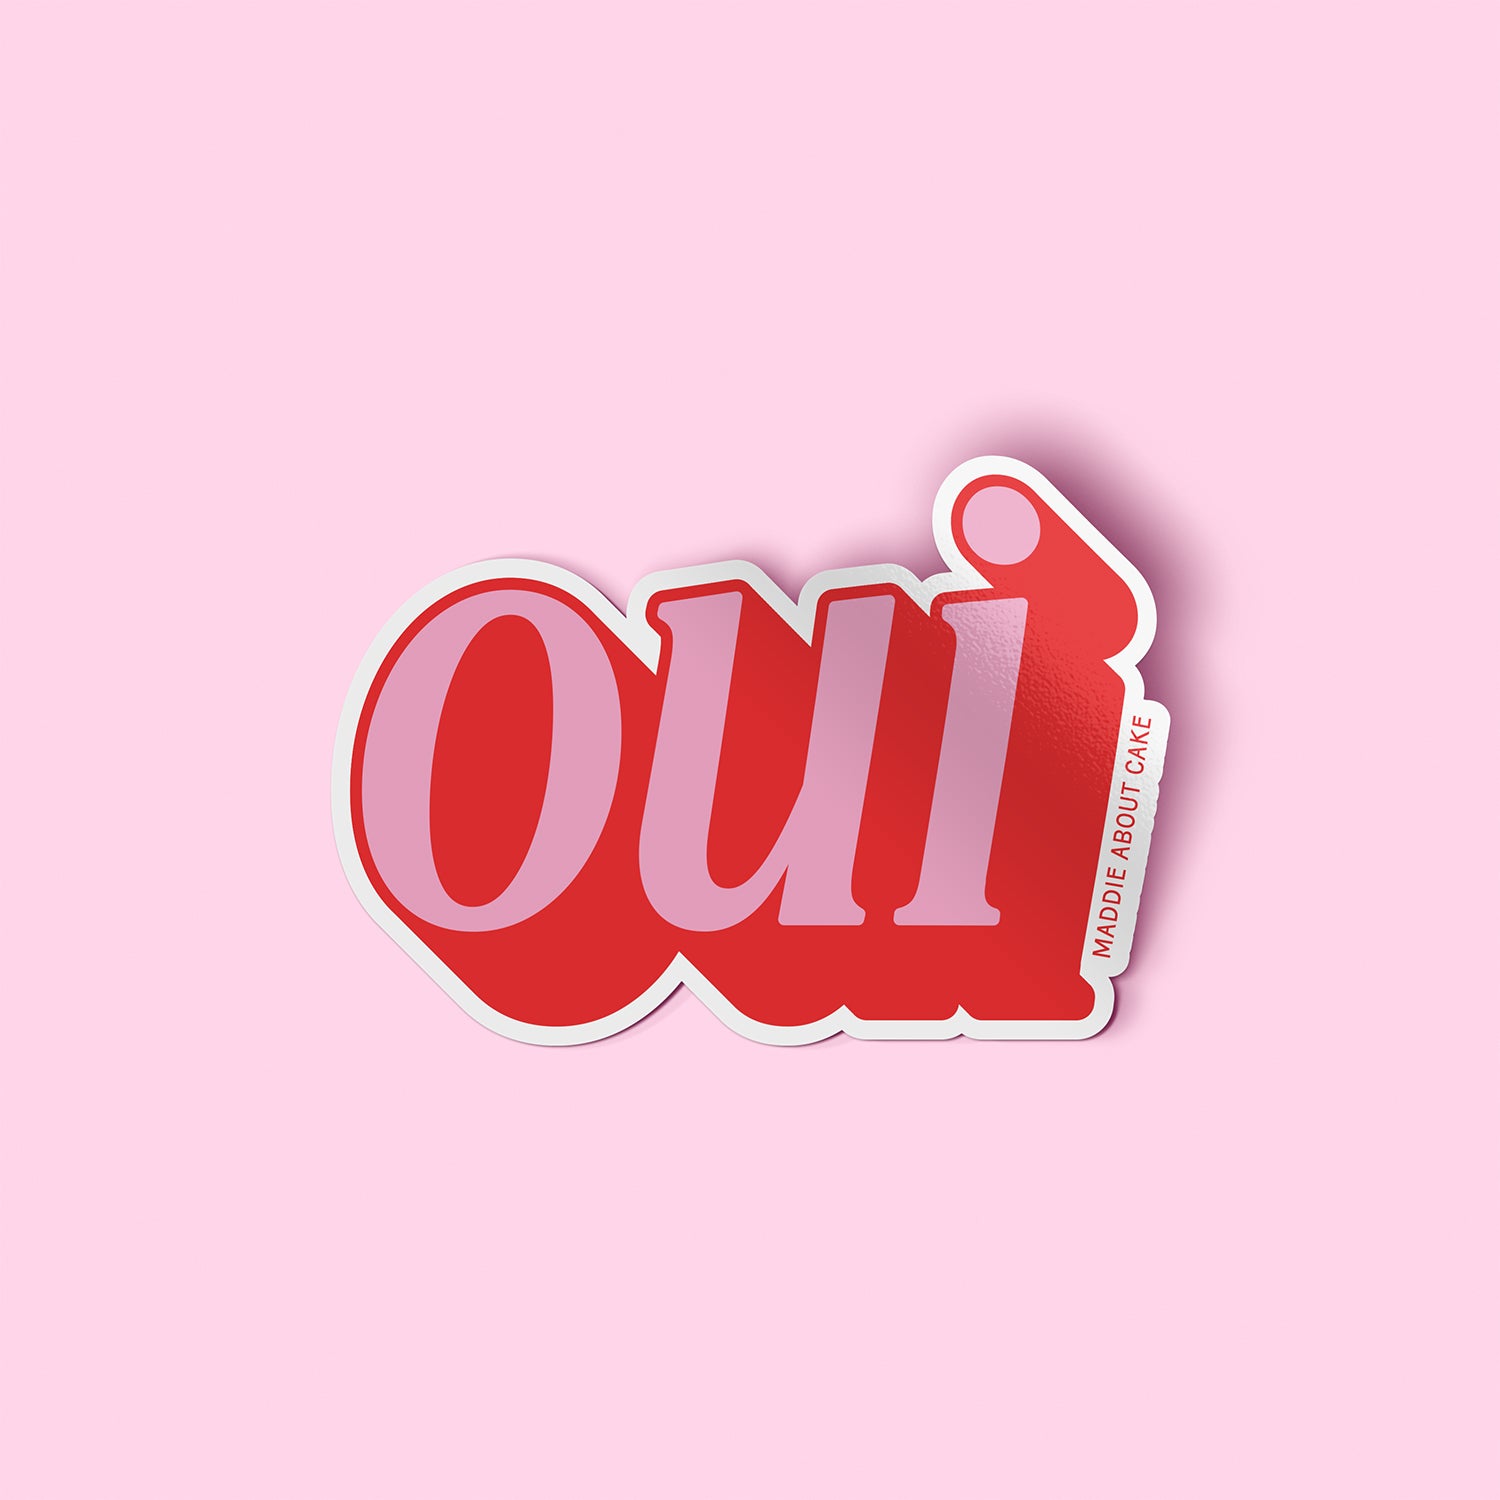 Pink and red decorative sticker that says "oui" in an italicized serif font. The text is pink with red shadow so it appears 3D. The sticker is laying on a light pink background.